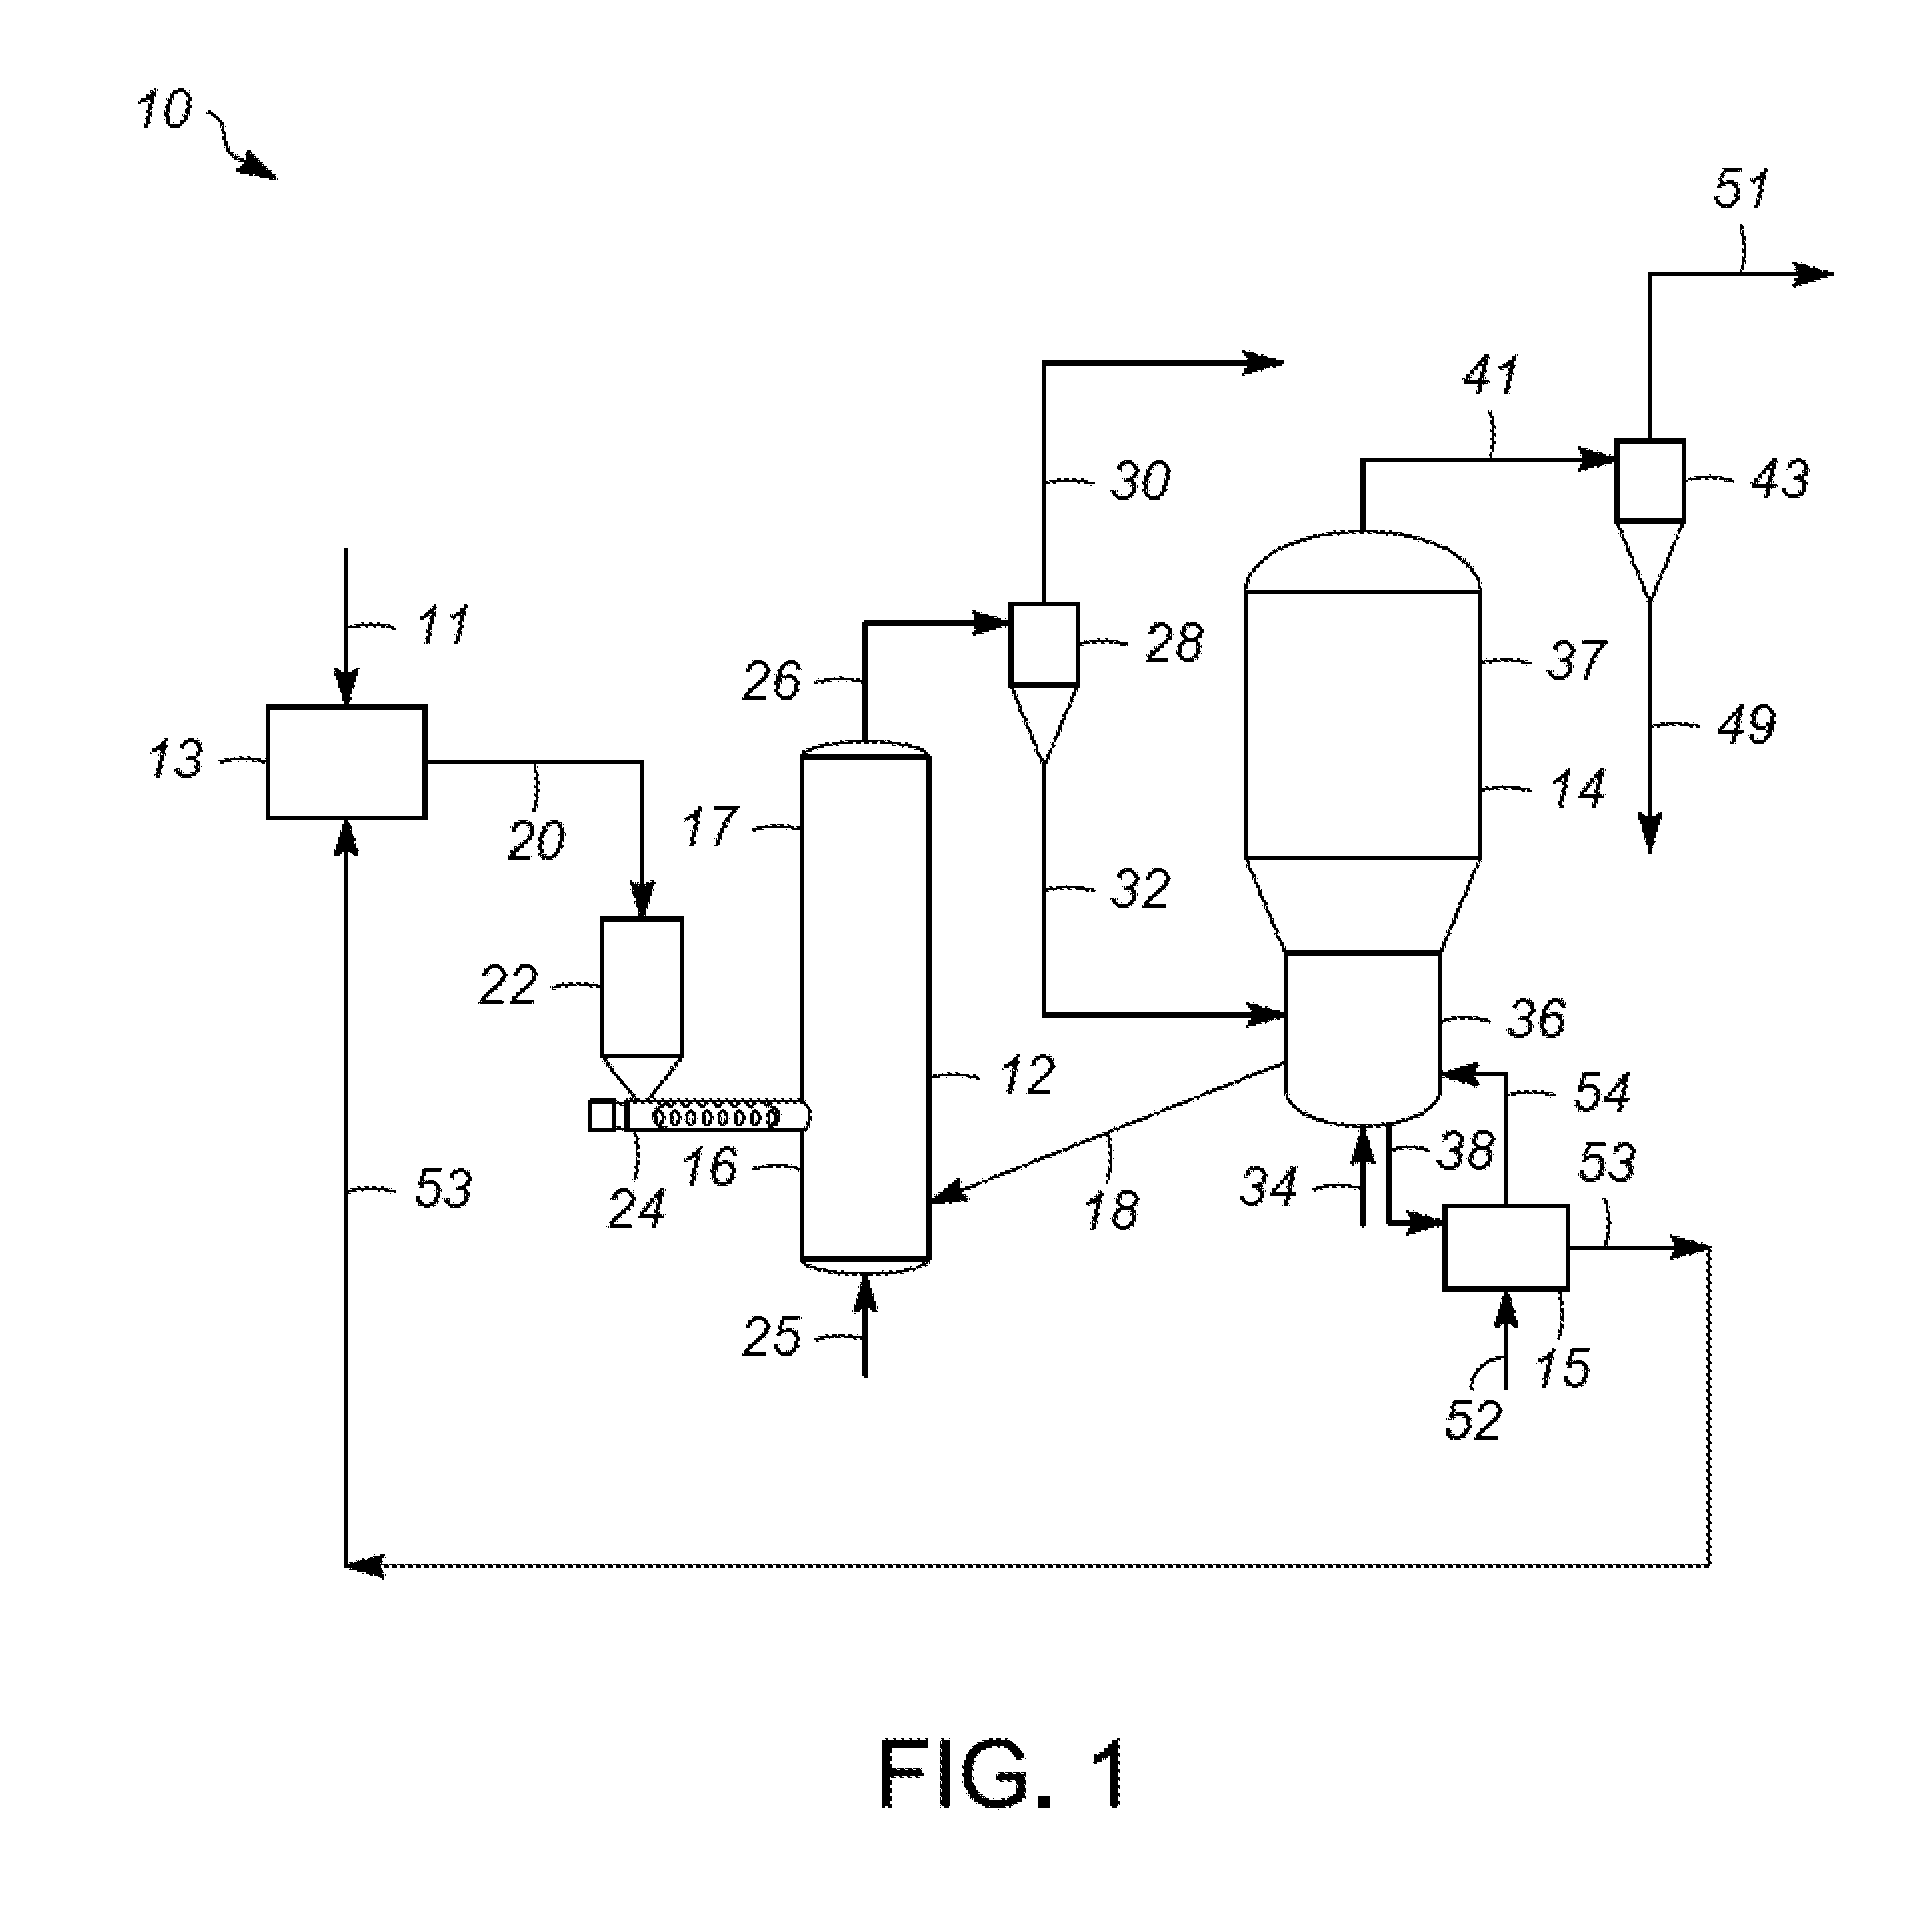 Apparatuses and methods for controlling heat for rapid thermal processing of carbonaceous material